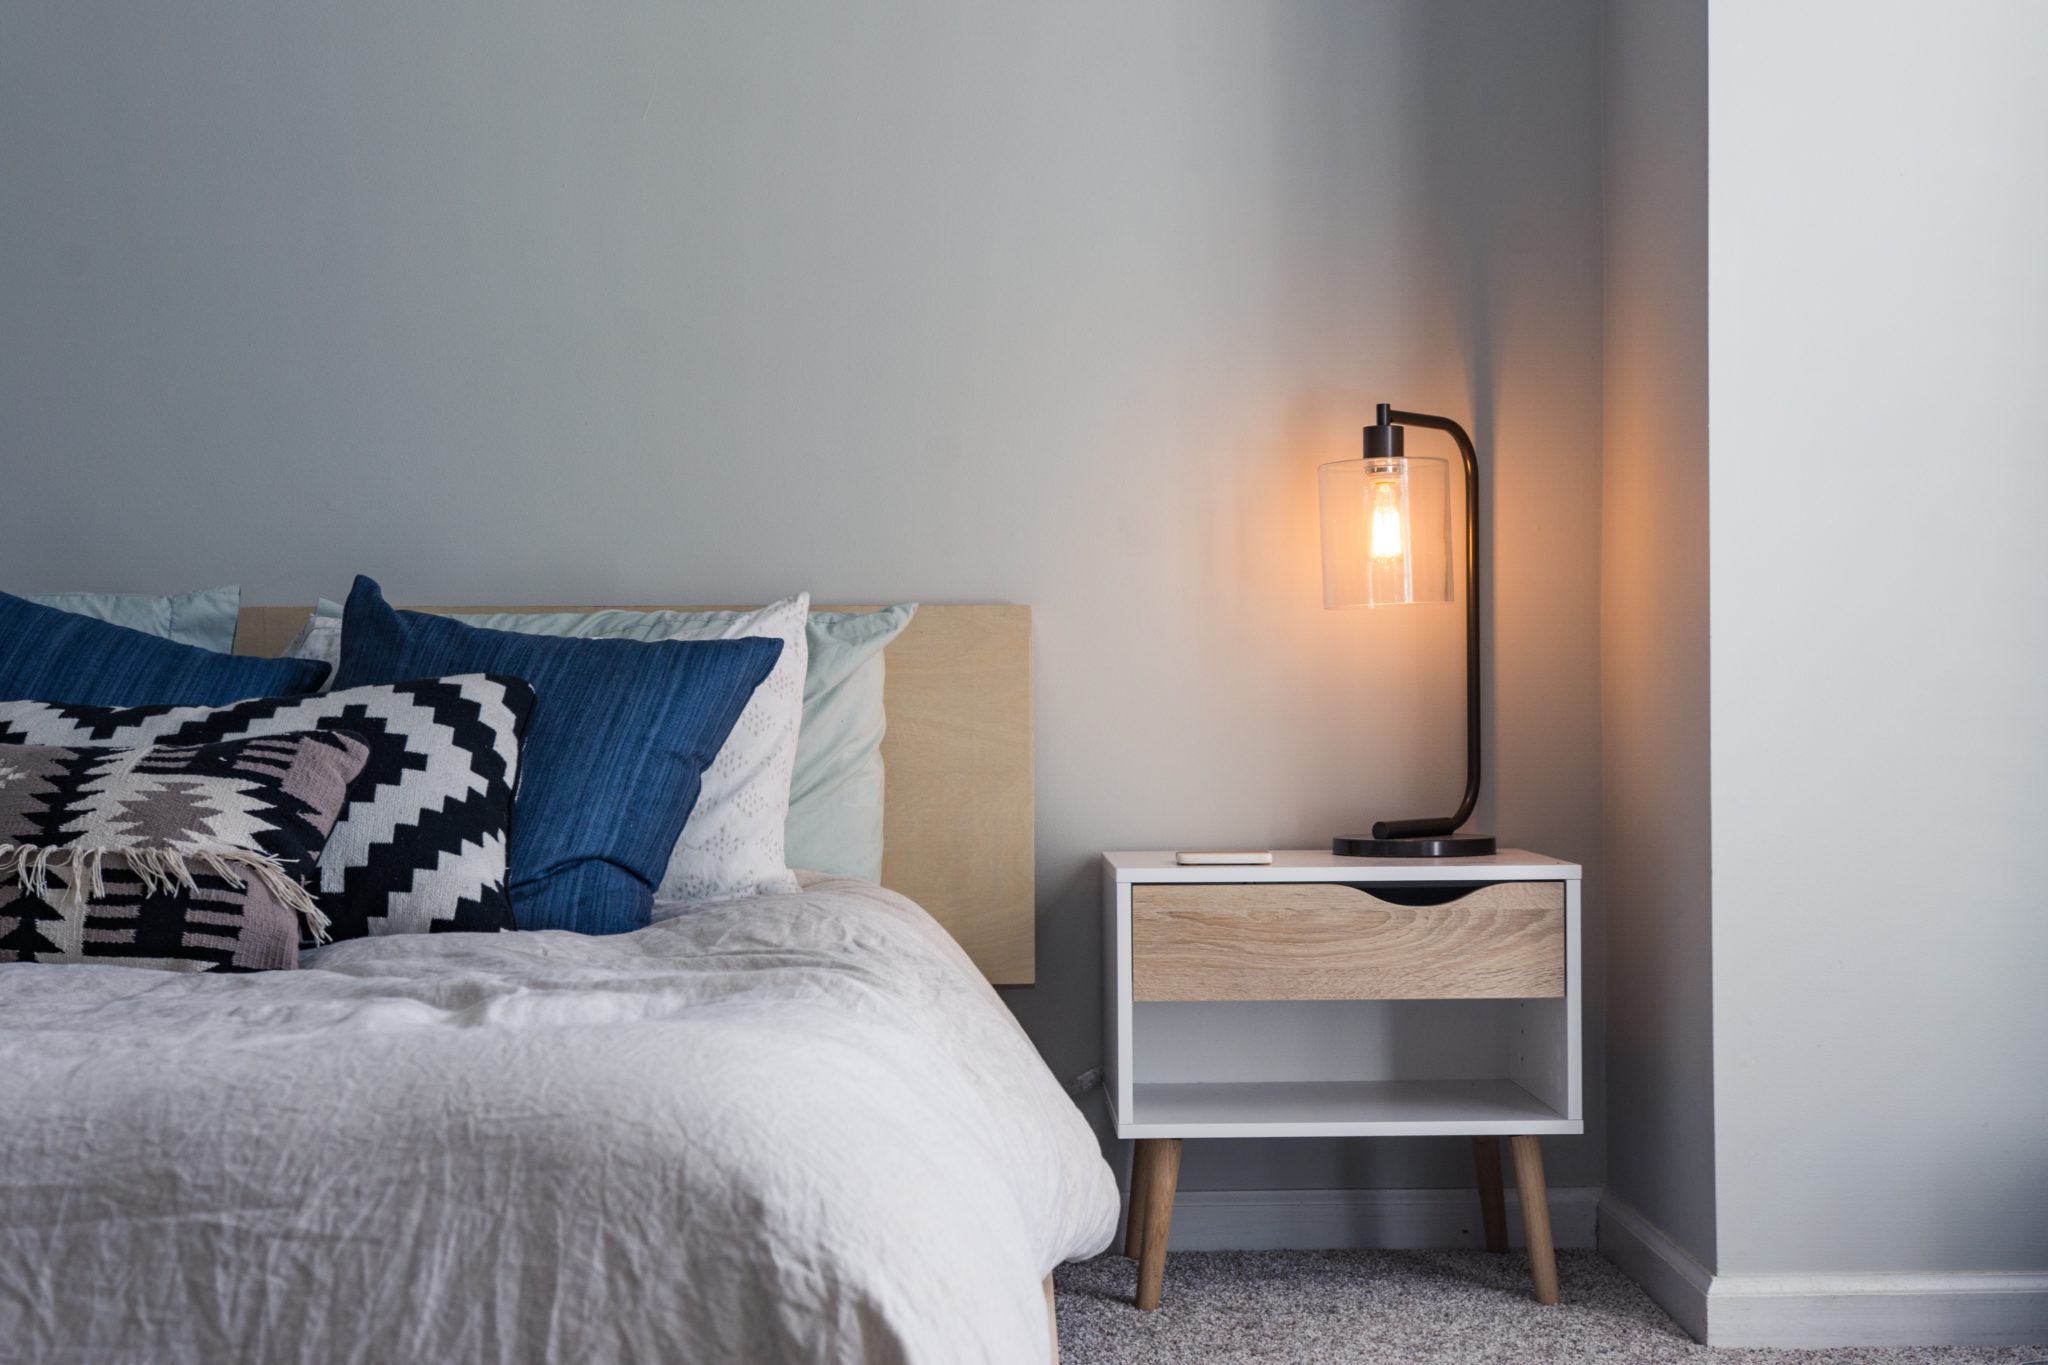 Photo of made bed and side table (Photo by Christopher Jolly on Unsplash)